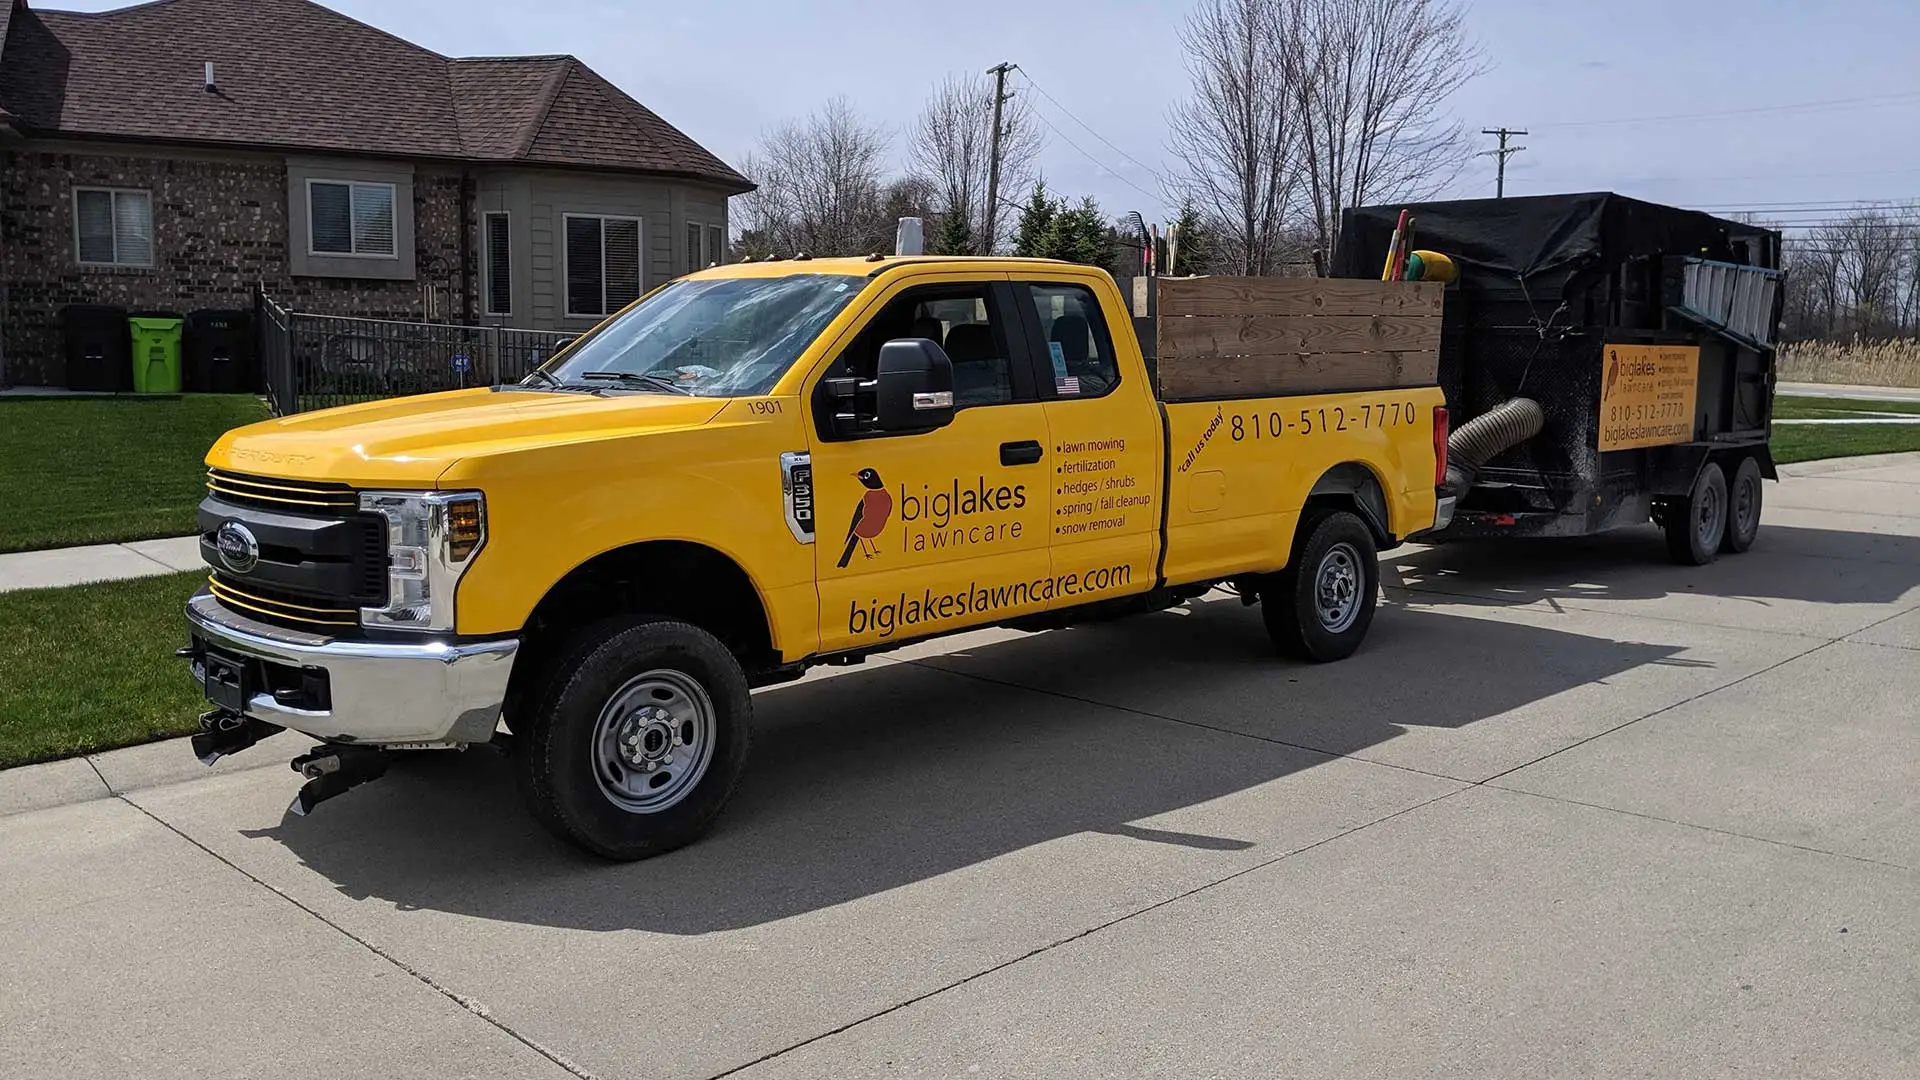 Big Lakes Lawncare work truck arriving to perform lawn care in Clinton Township, MI.